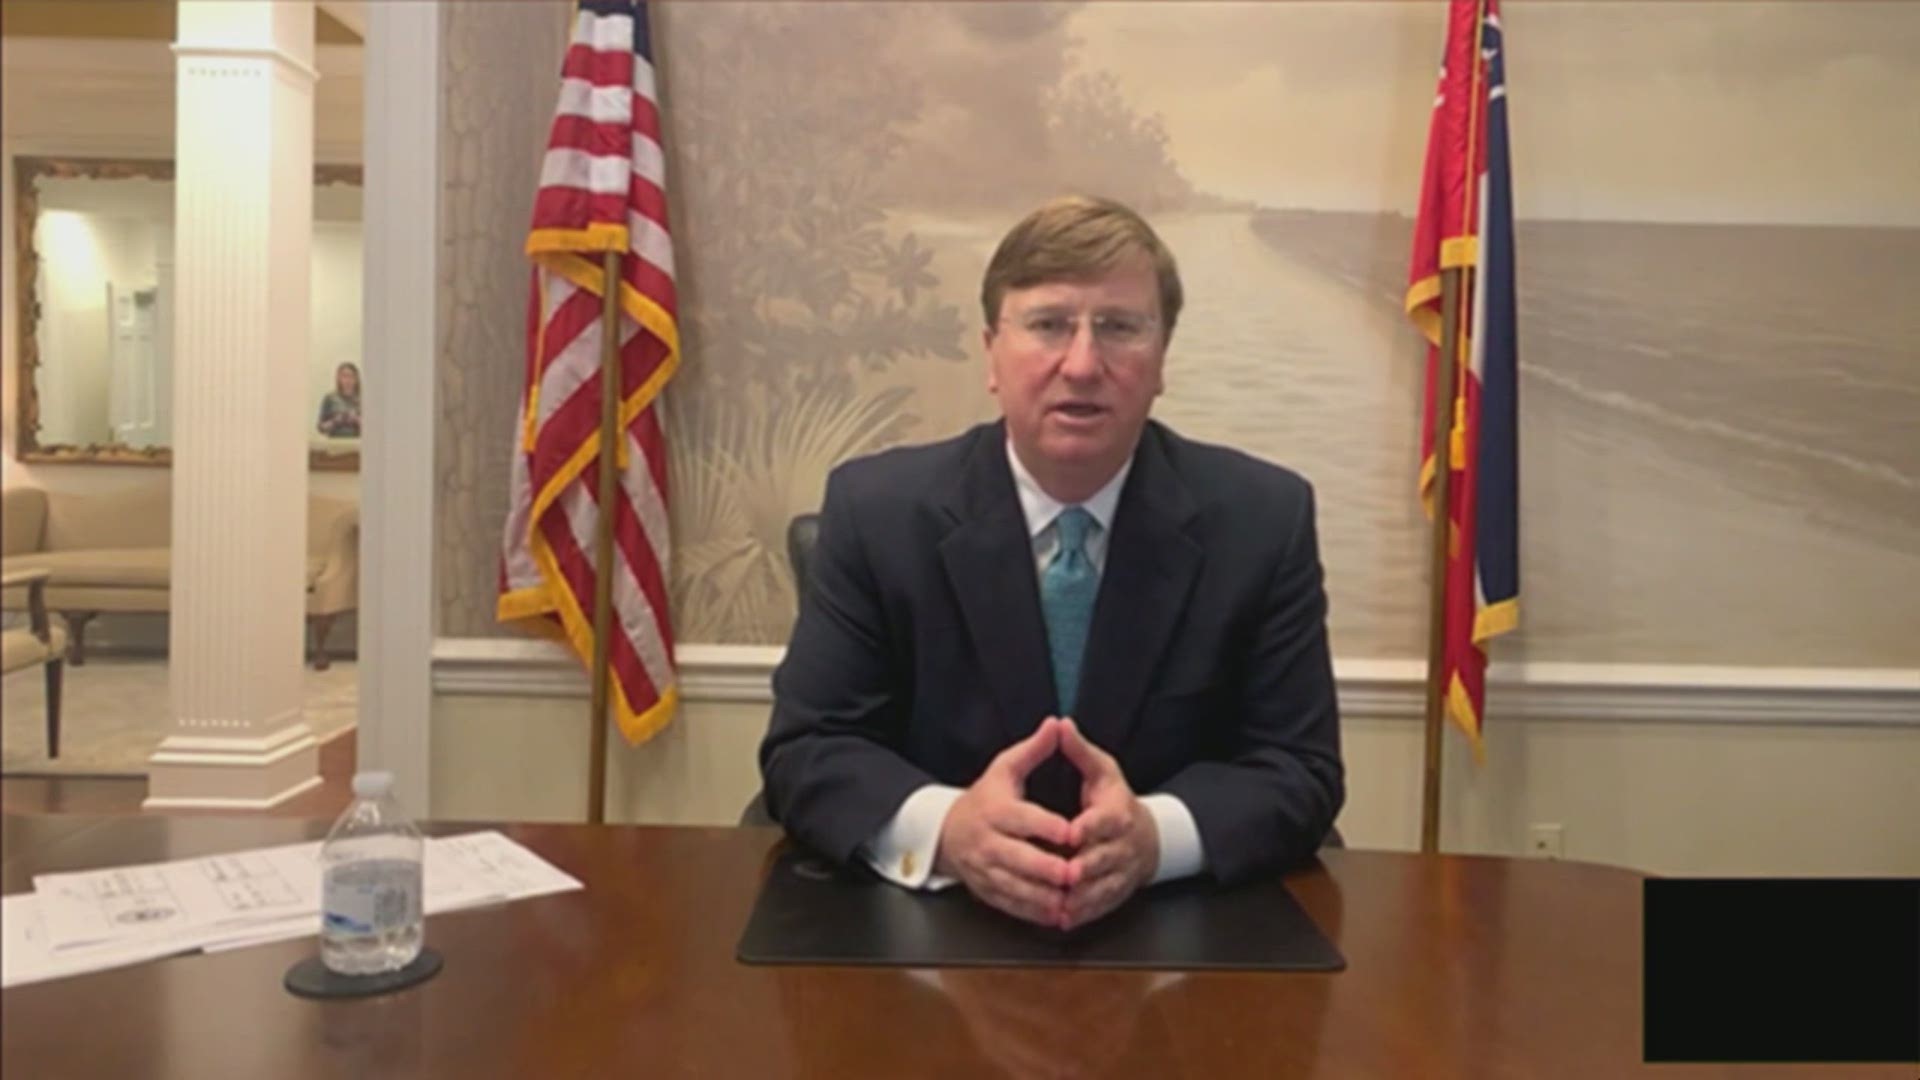 Mississippi Gov. Tate Reeves was interviewed for Tuesday afternoon's Pandemic Special for ABC News.